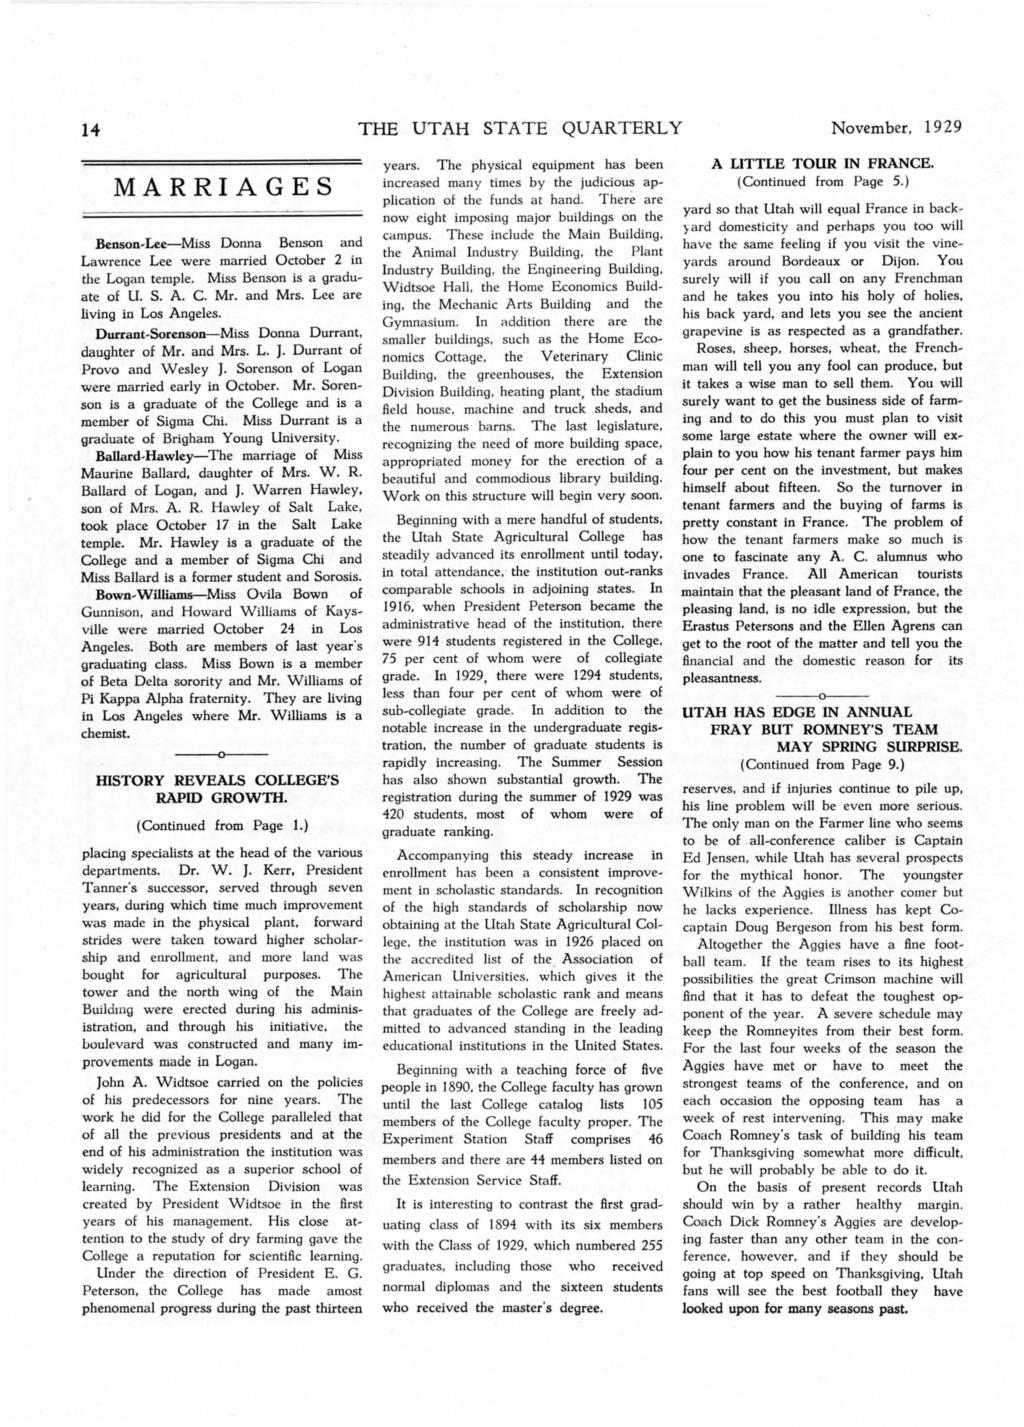 14 THE UTAH STATE QUARTERLY November, 1929 MARRAGES Benson-Lee-Mss Donna Benson and Lawrence Lee were marred October 2 n the Logan temple. Mss Benson s a graduate of U. S. A. C. Mr. and Mrs.